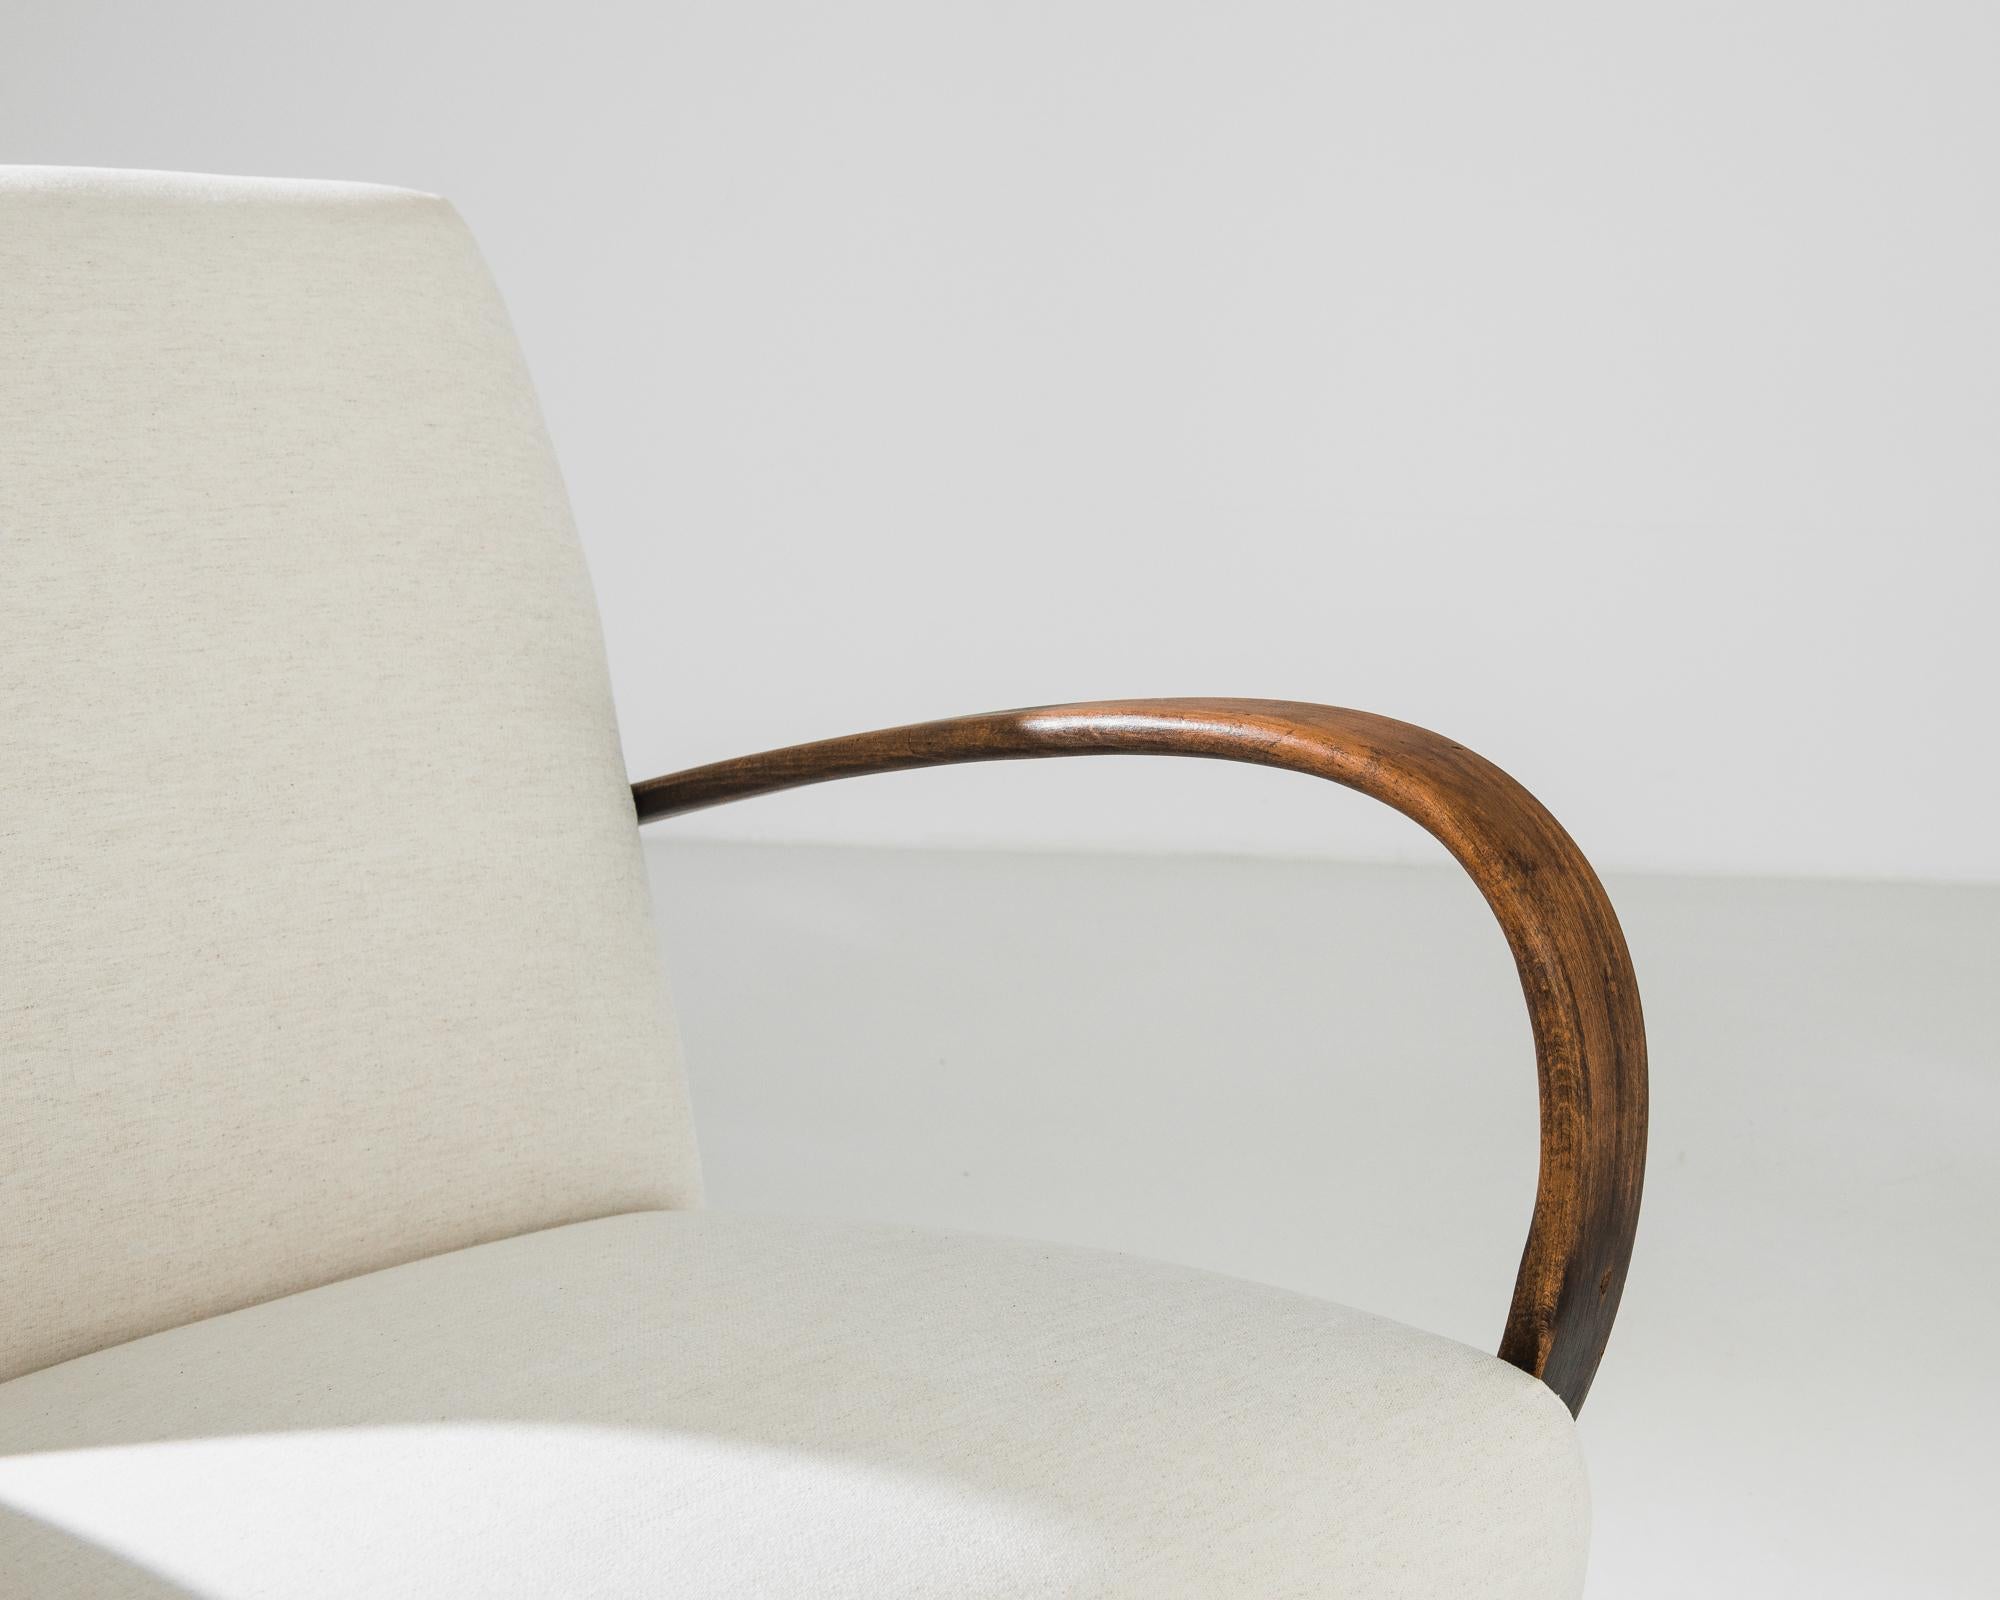 An upholstered armchair by Czech furniture designer J. Halabala. Made in the 1950s, the eye-catching silhouette and comfortable design has an enduring appeal. Influenced by Modern and Art Deco design, a deep upholstered seat upon curved wooden feet